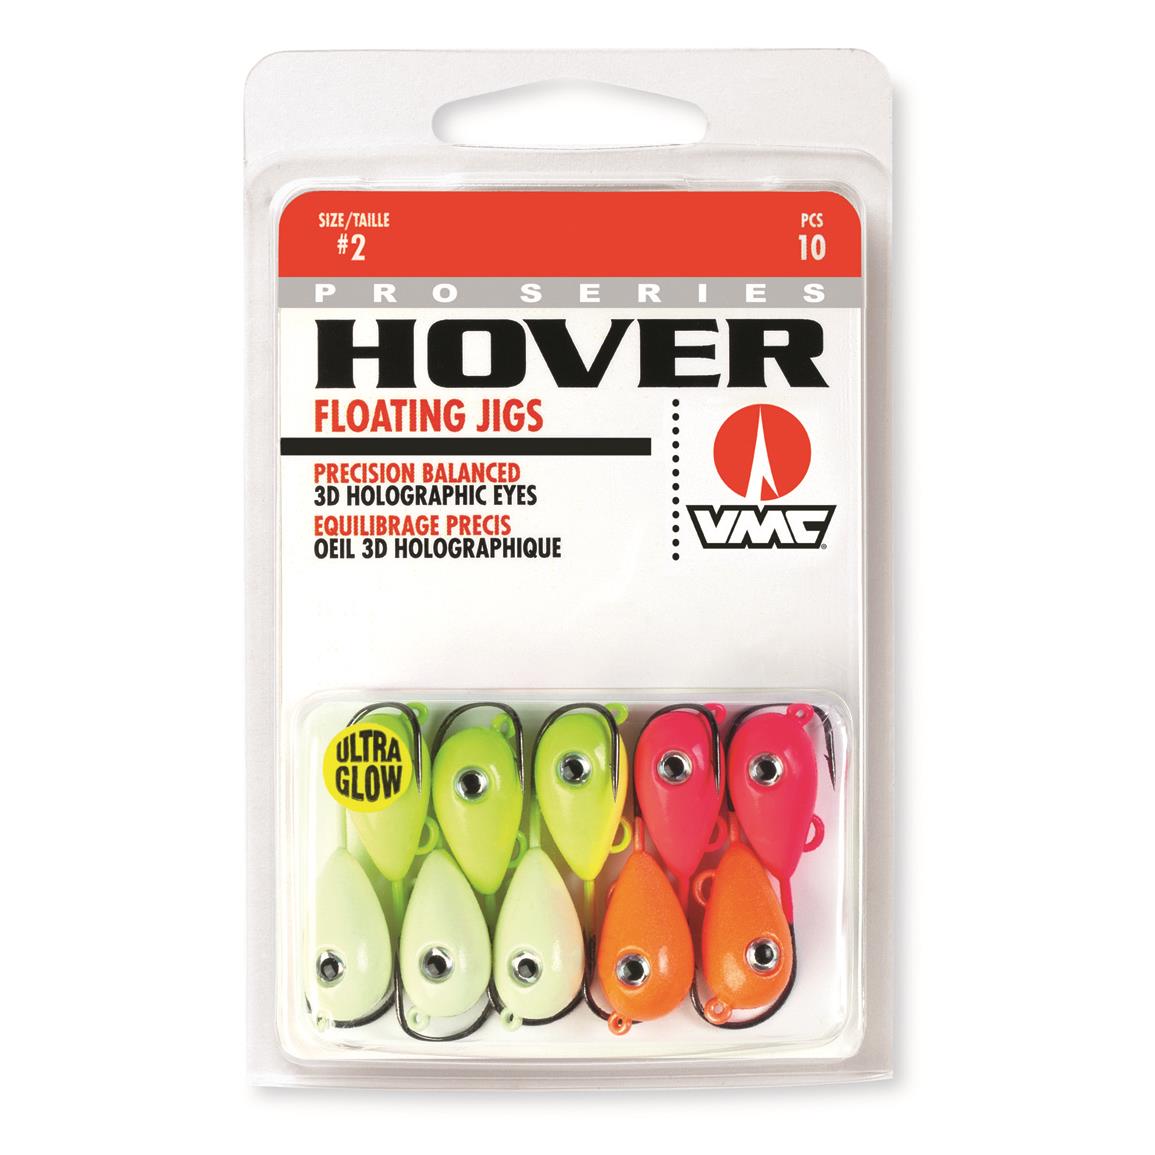 VMC Ultra Glow Hover Floating Jig Kit, Size 2, Assorted